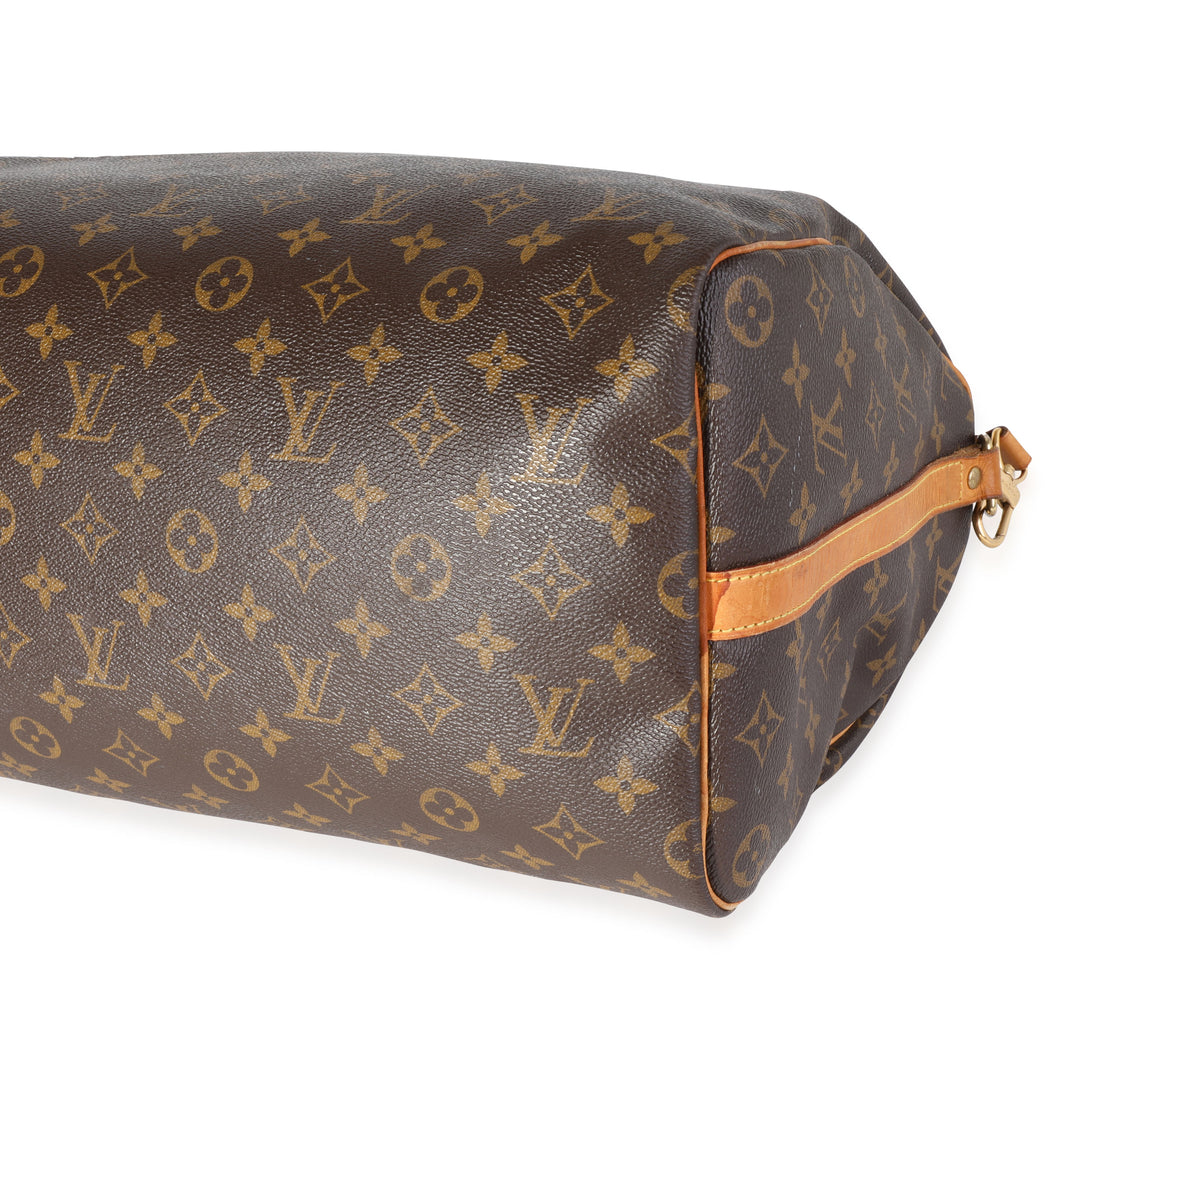 Authenticated Used Louis Vuitton Speedy Bandouliere 40 Shoulder